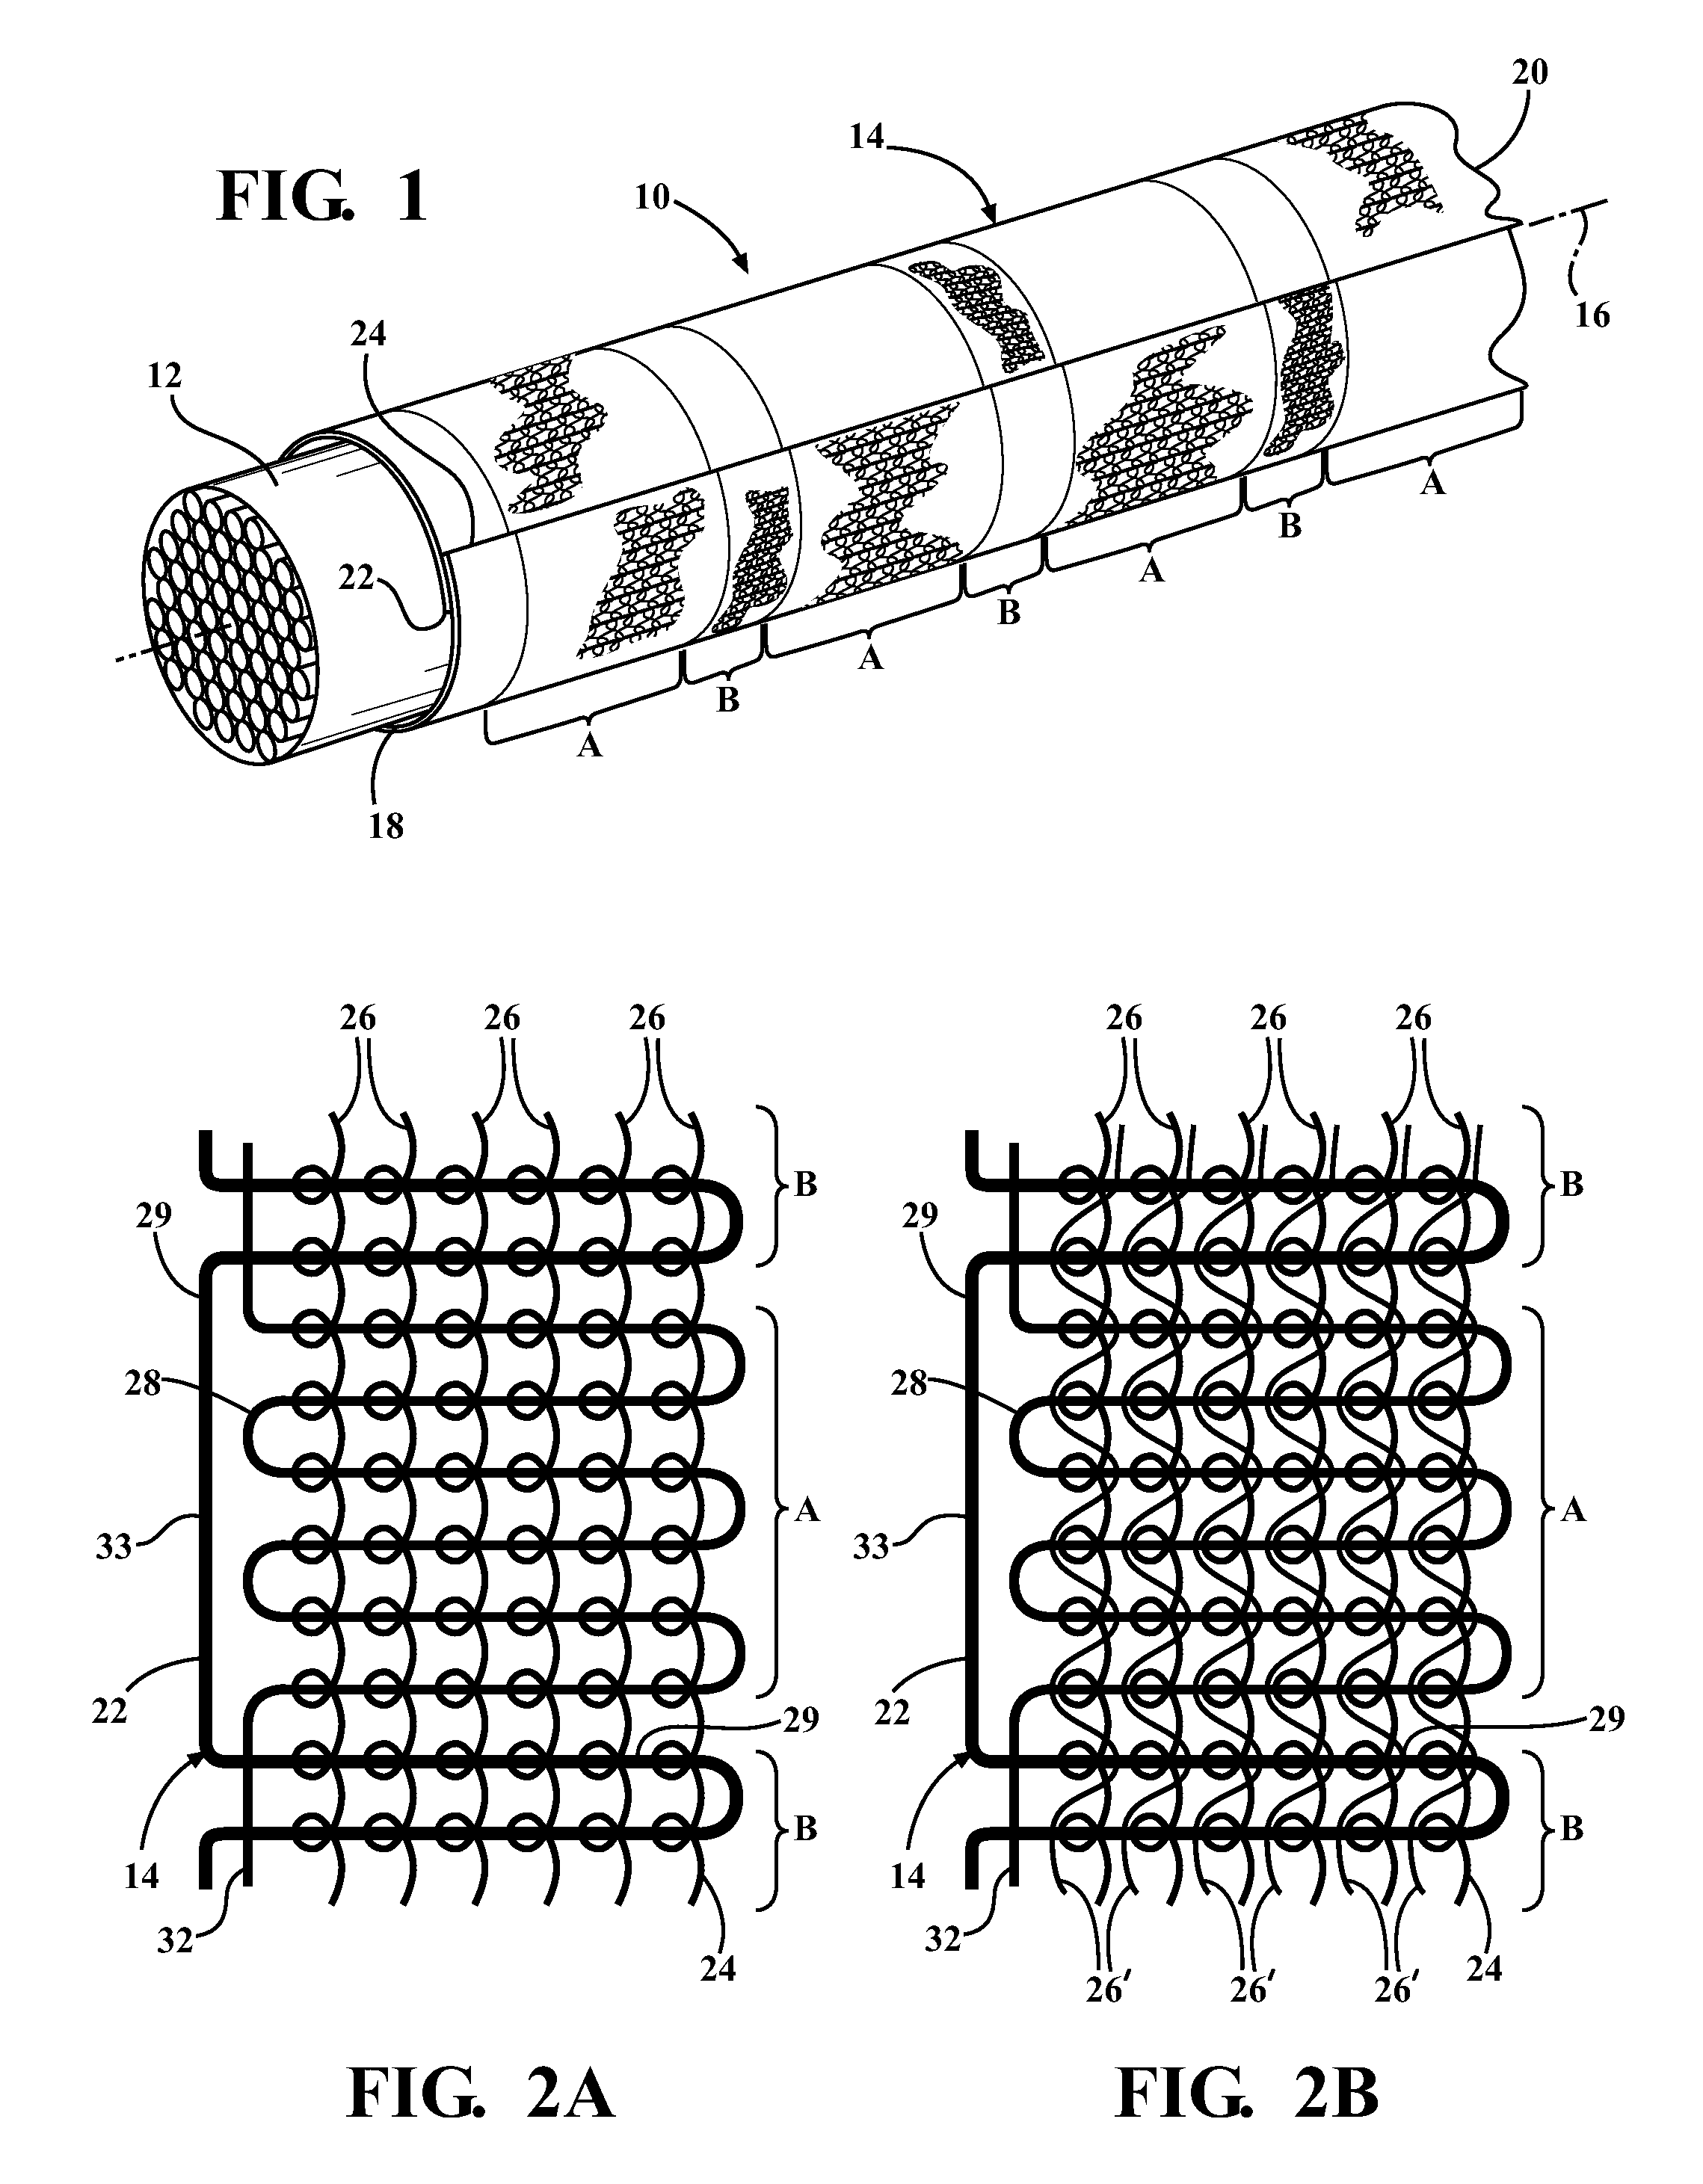 Non-kinking wrapple knit sleeve and method of construction thereof